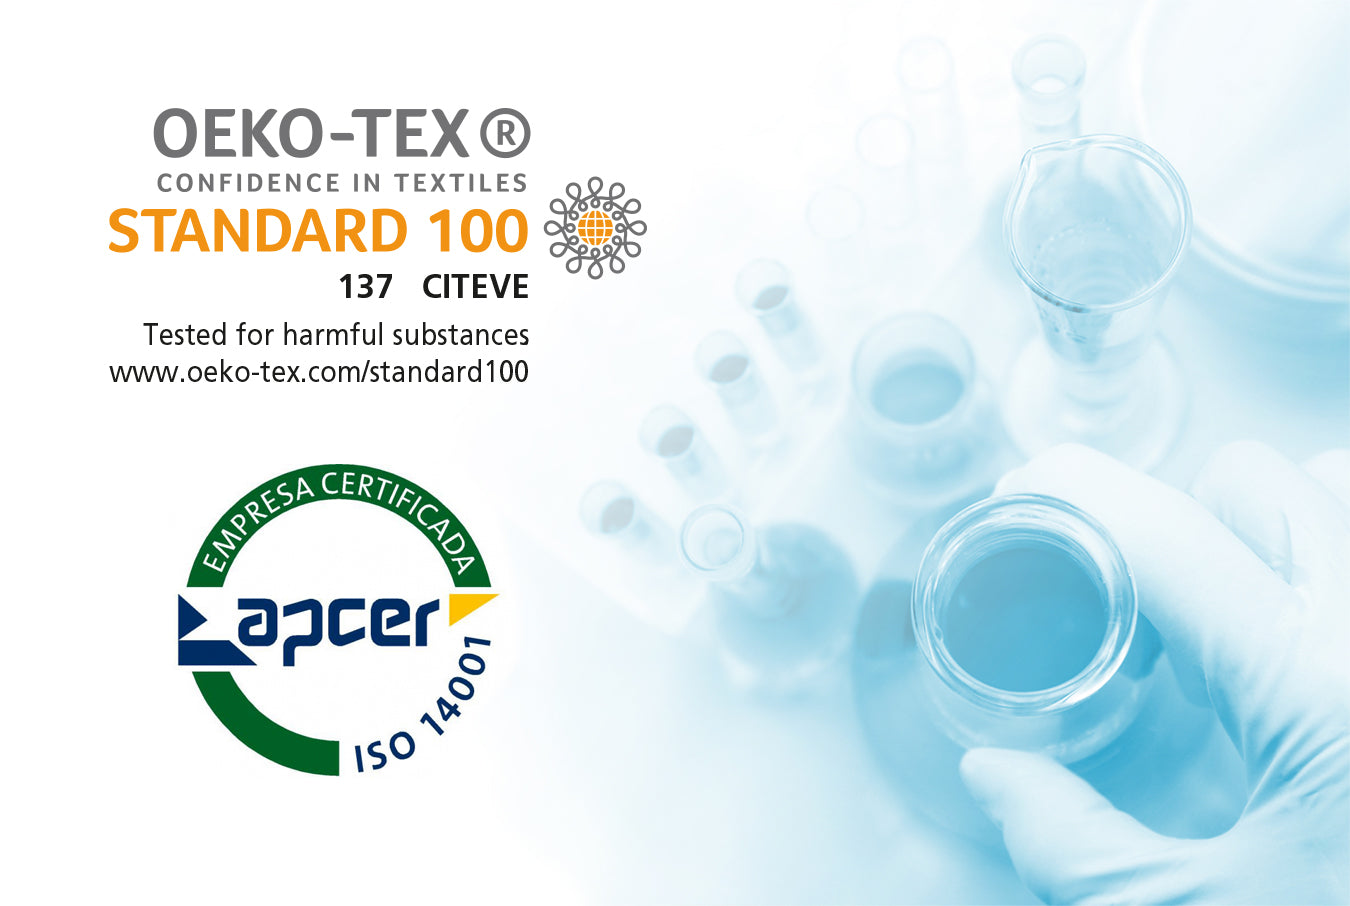 Our manufacturer is Oeko-tex and Apcer certified